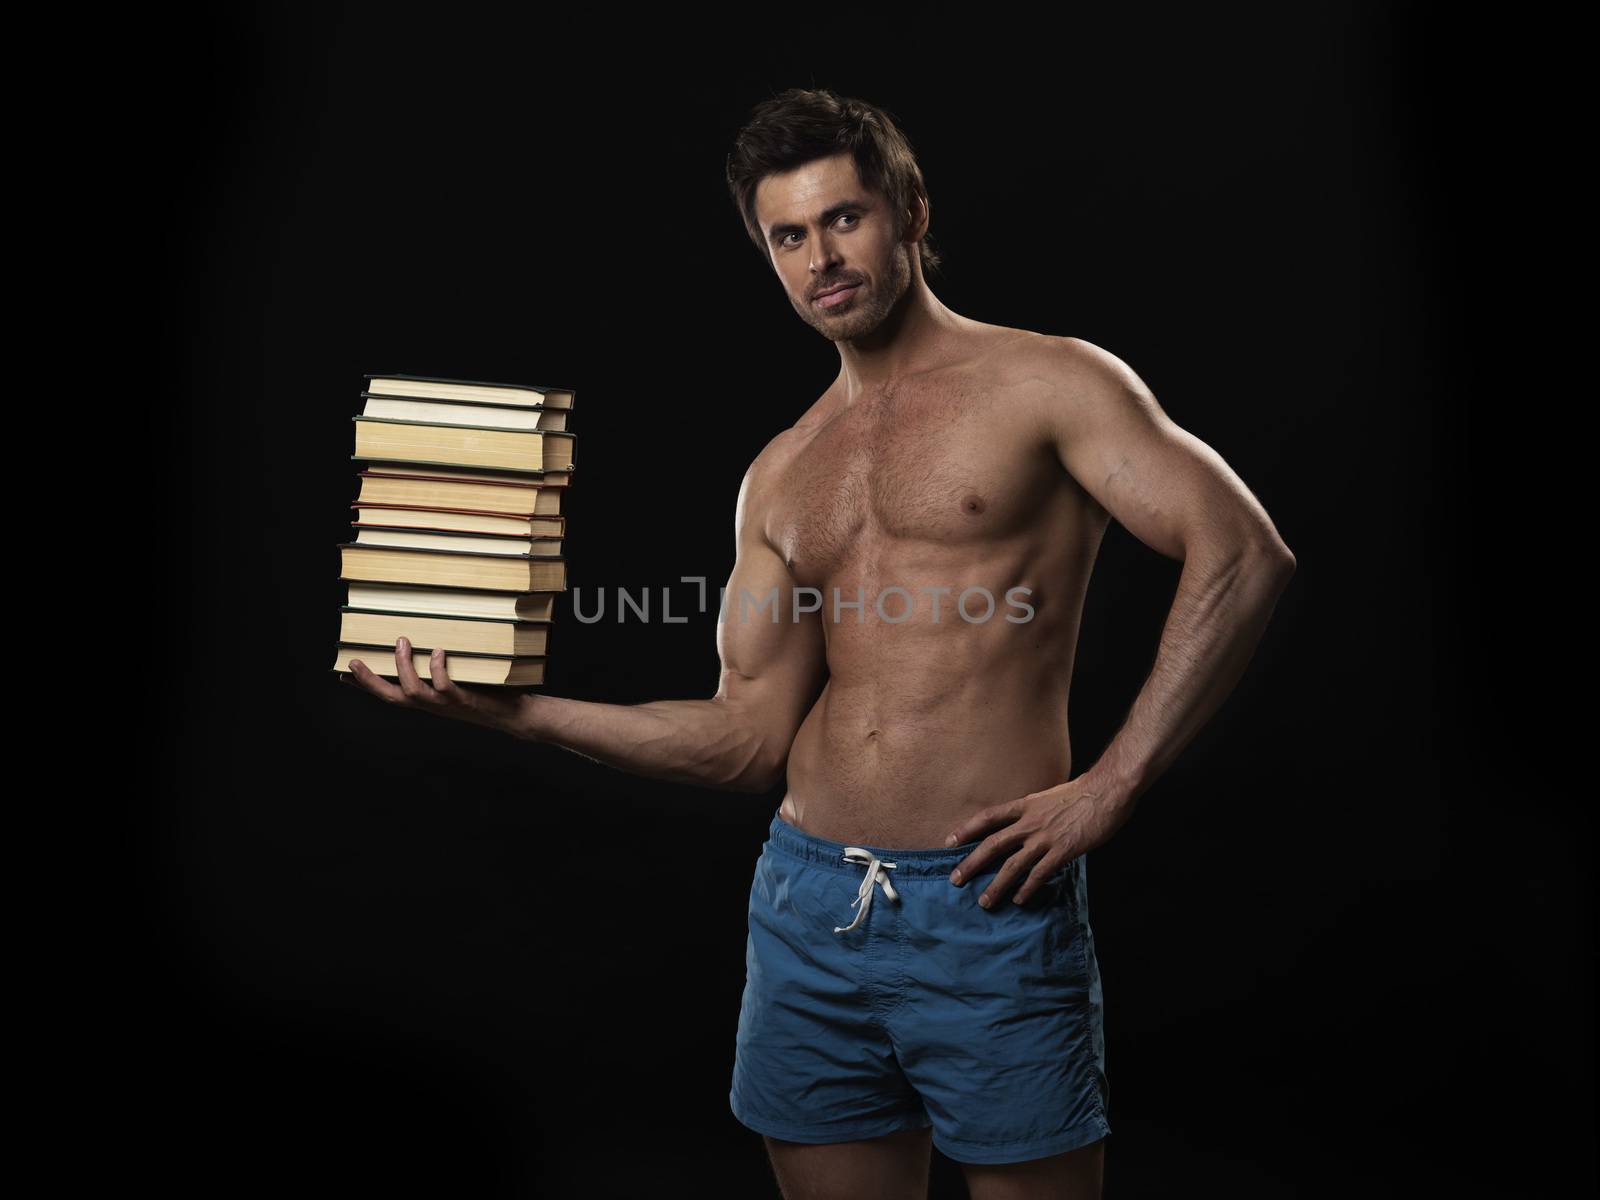 Knowledge is power concept, strong muscular man holding stack of books